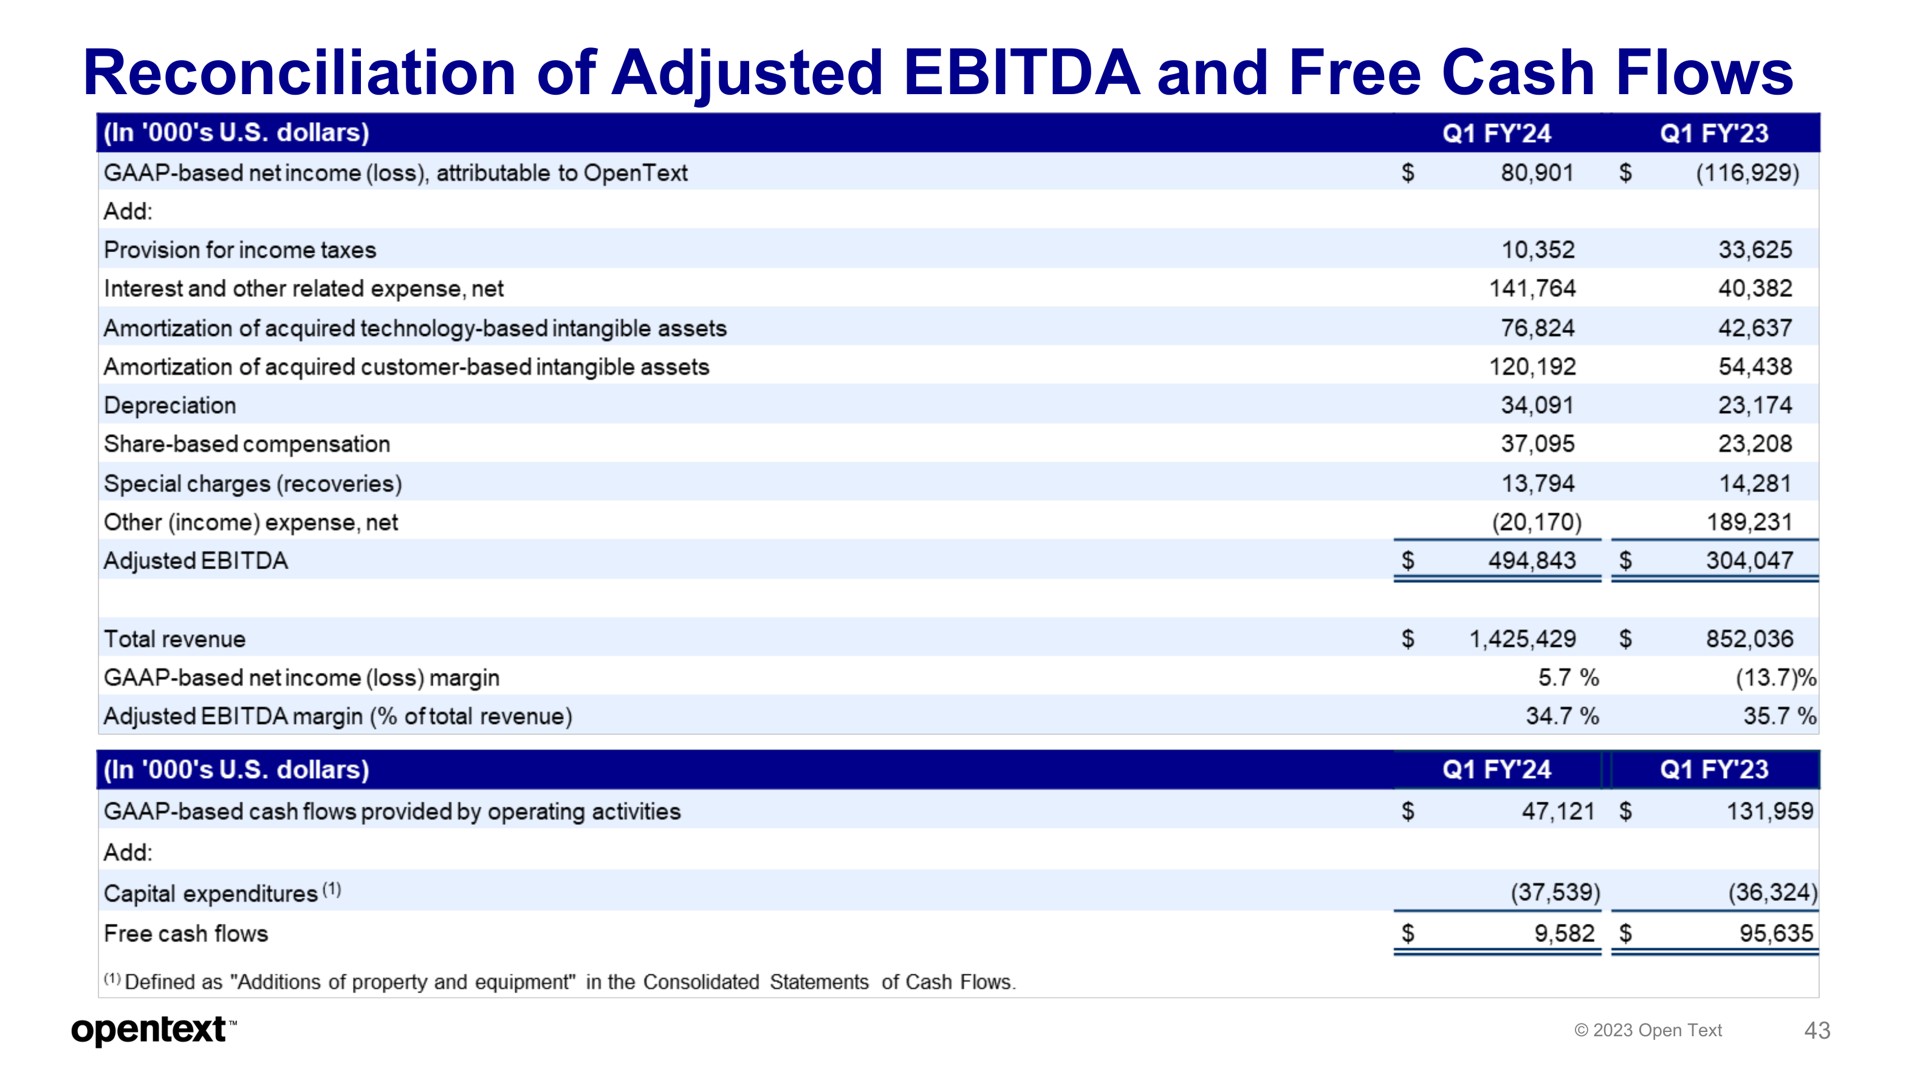 reconciliation of adjusted and free cash flows | OpenText